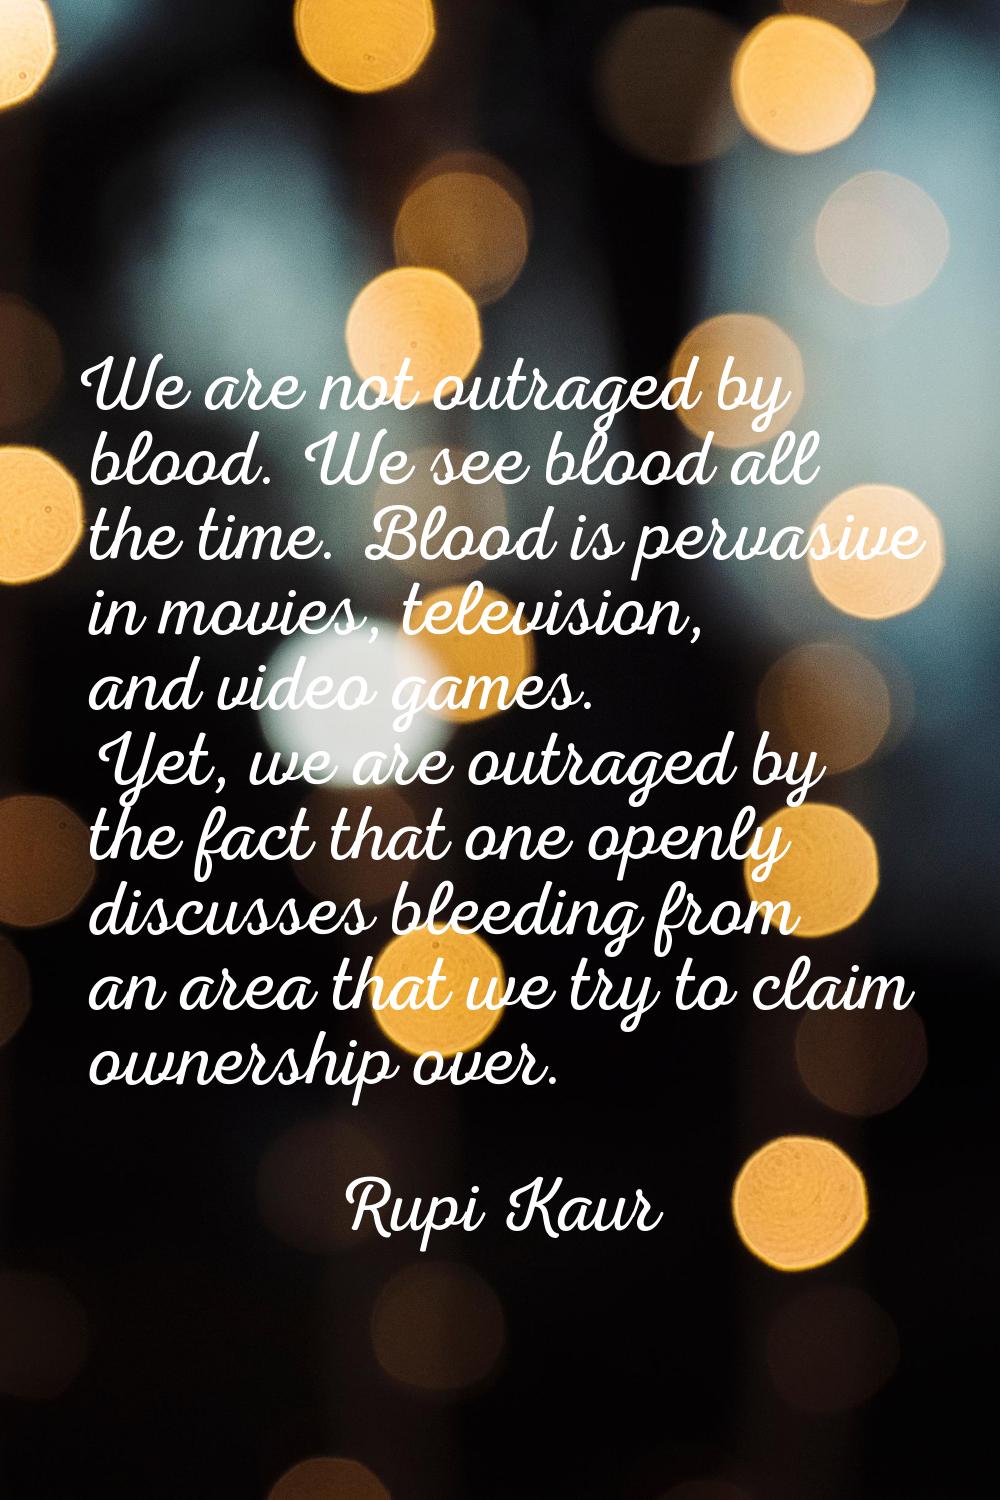 We are not outraged by blood. We see blood all the time. Blood is pervasive in movies, television, 